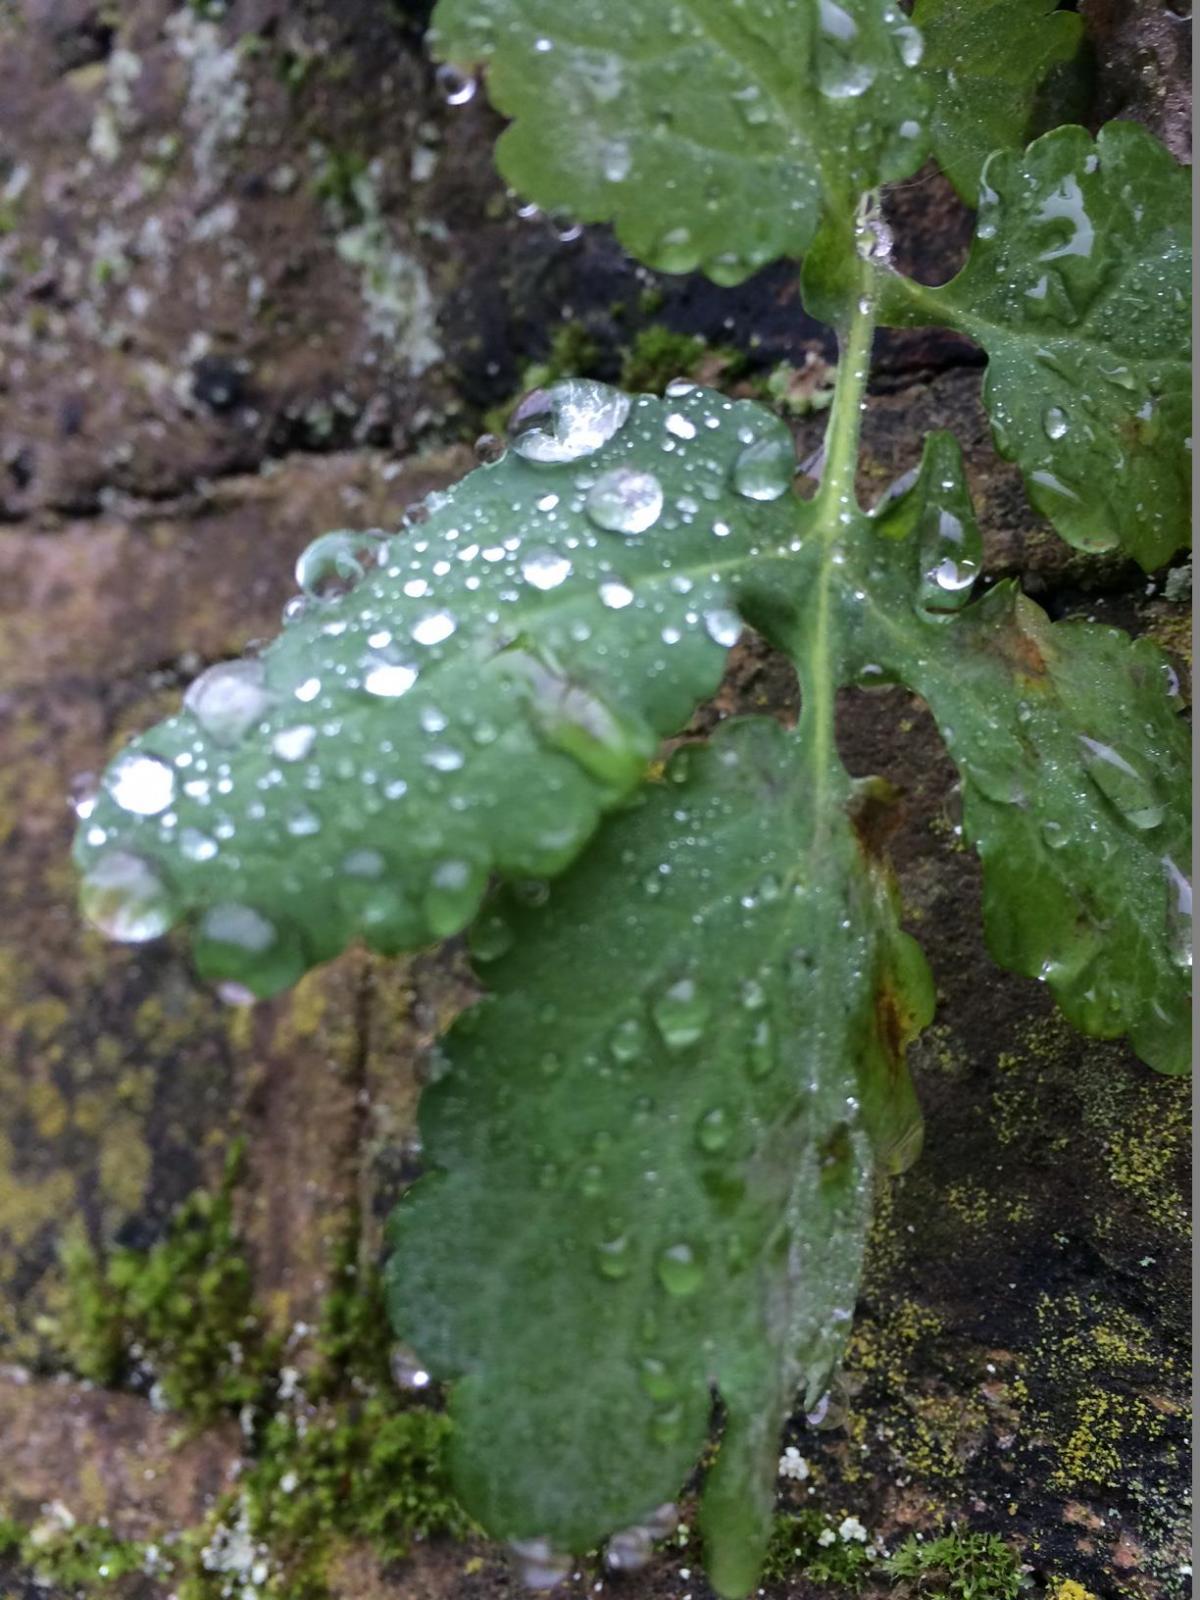 Francesca Buchanan sent in this photo of rain droplets on leaves